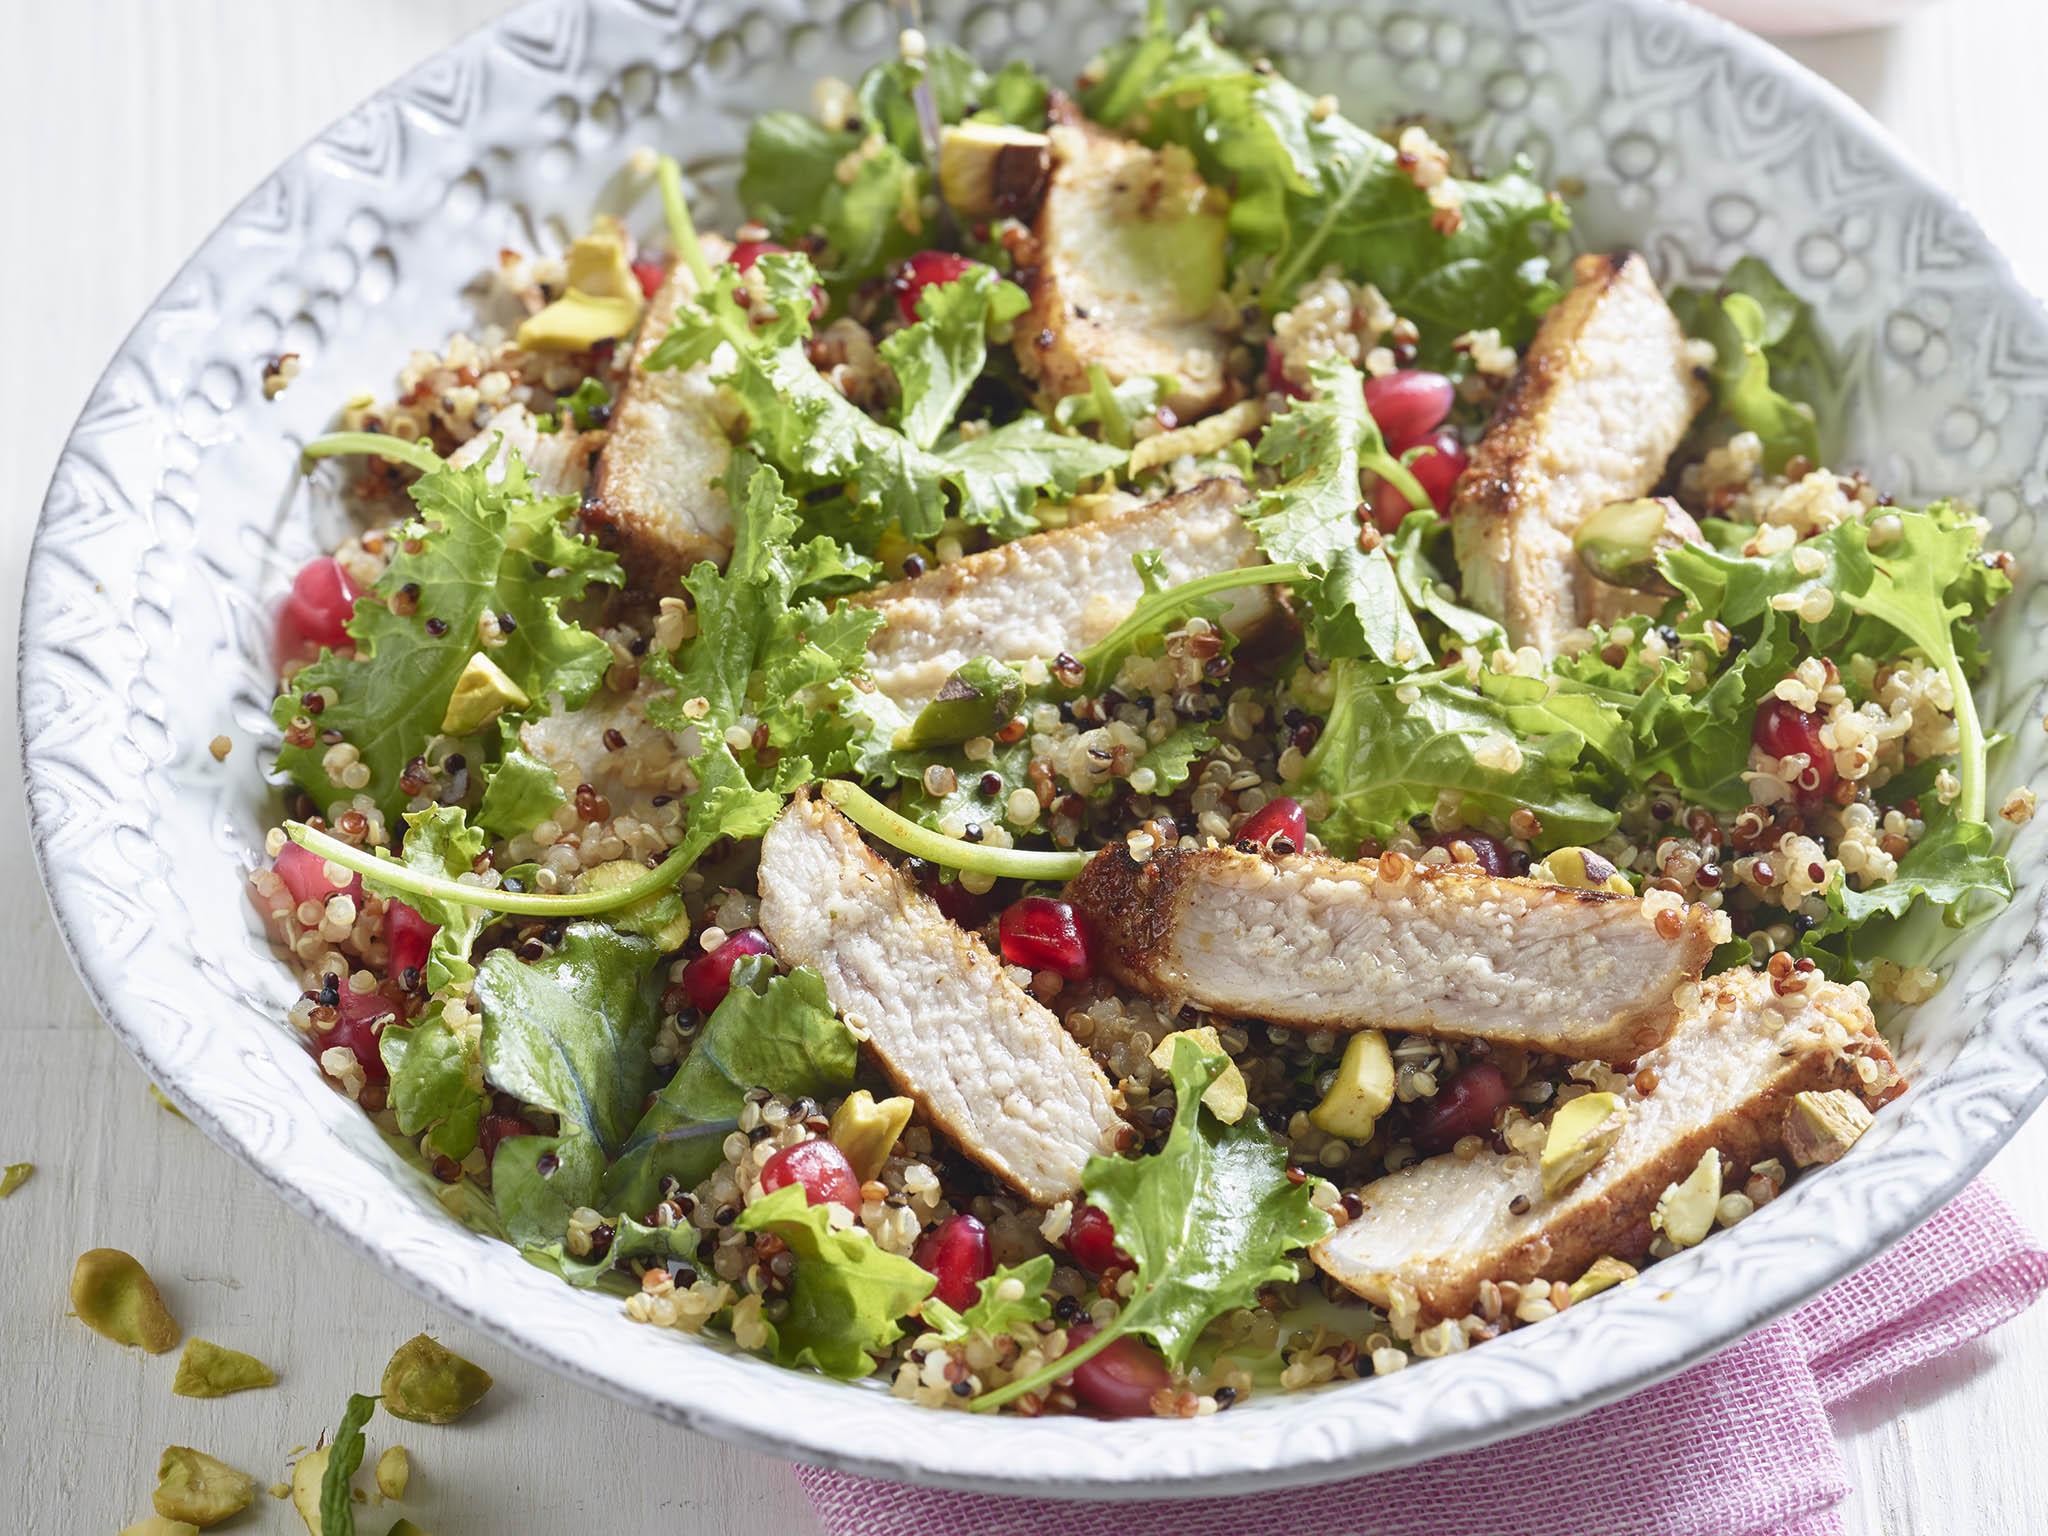 A bit of piggy and pomegranate – the perfect detox